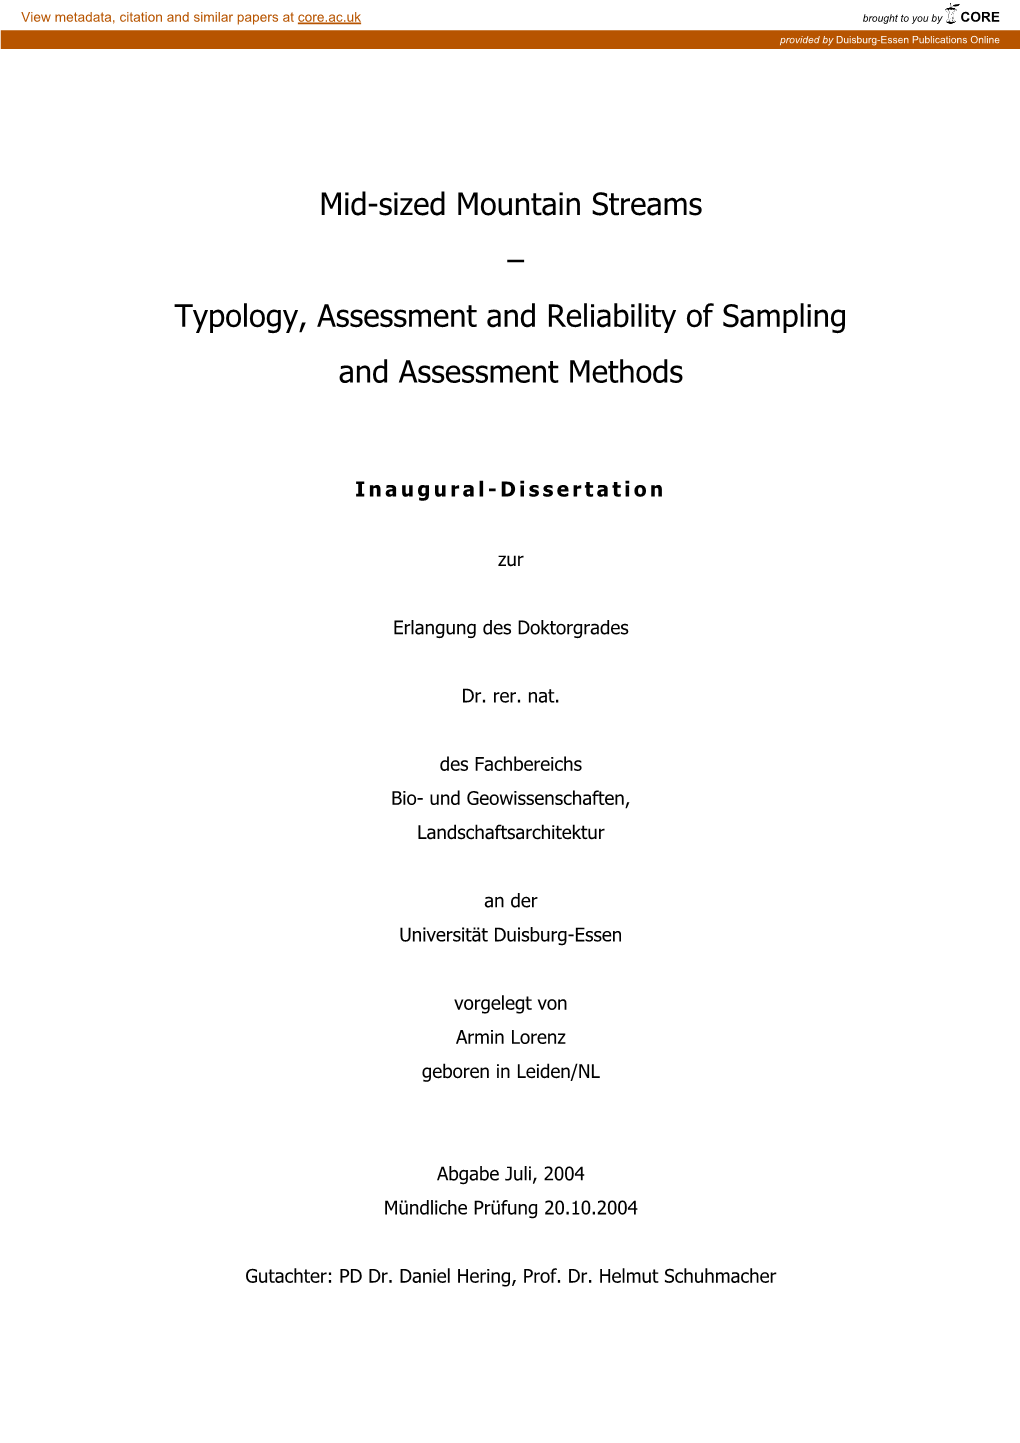 Mid-Sized Mountain Streams – Typology, Assessment and Reliability of Sampling and Assessment Methods